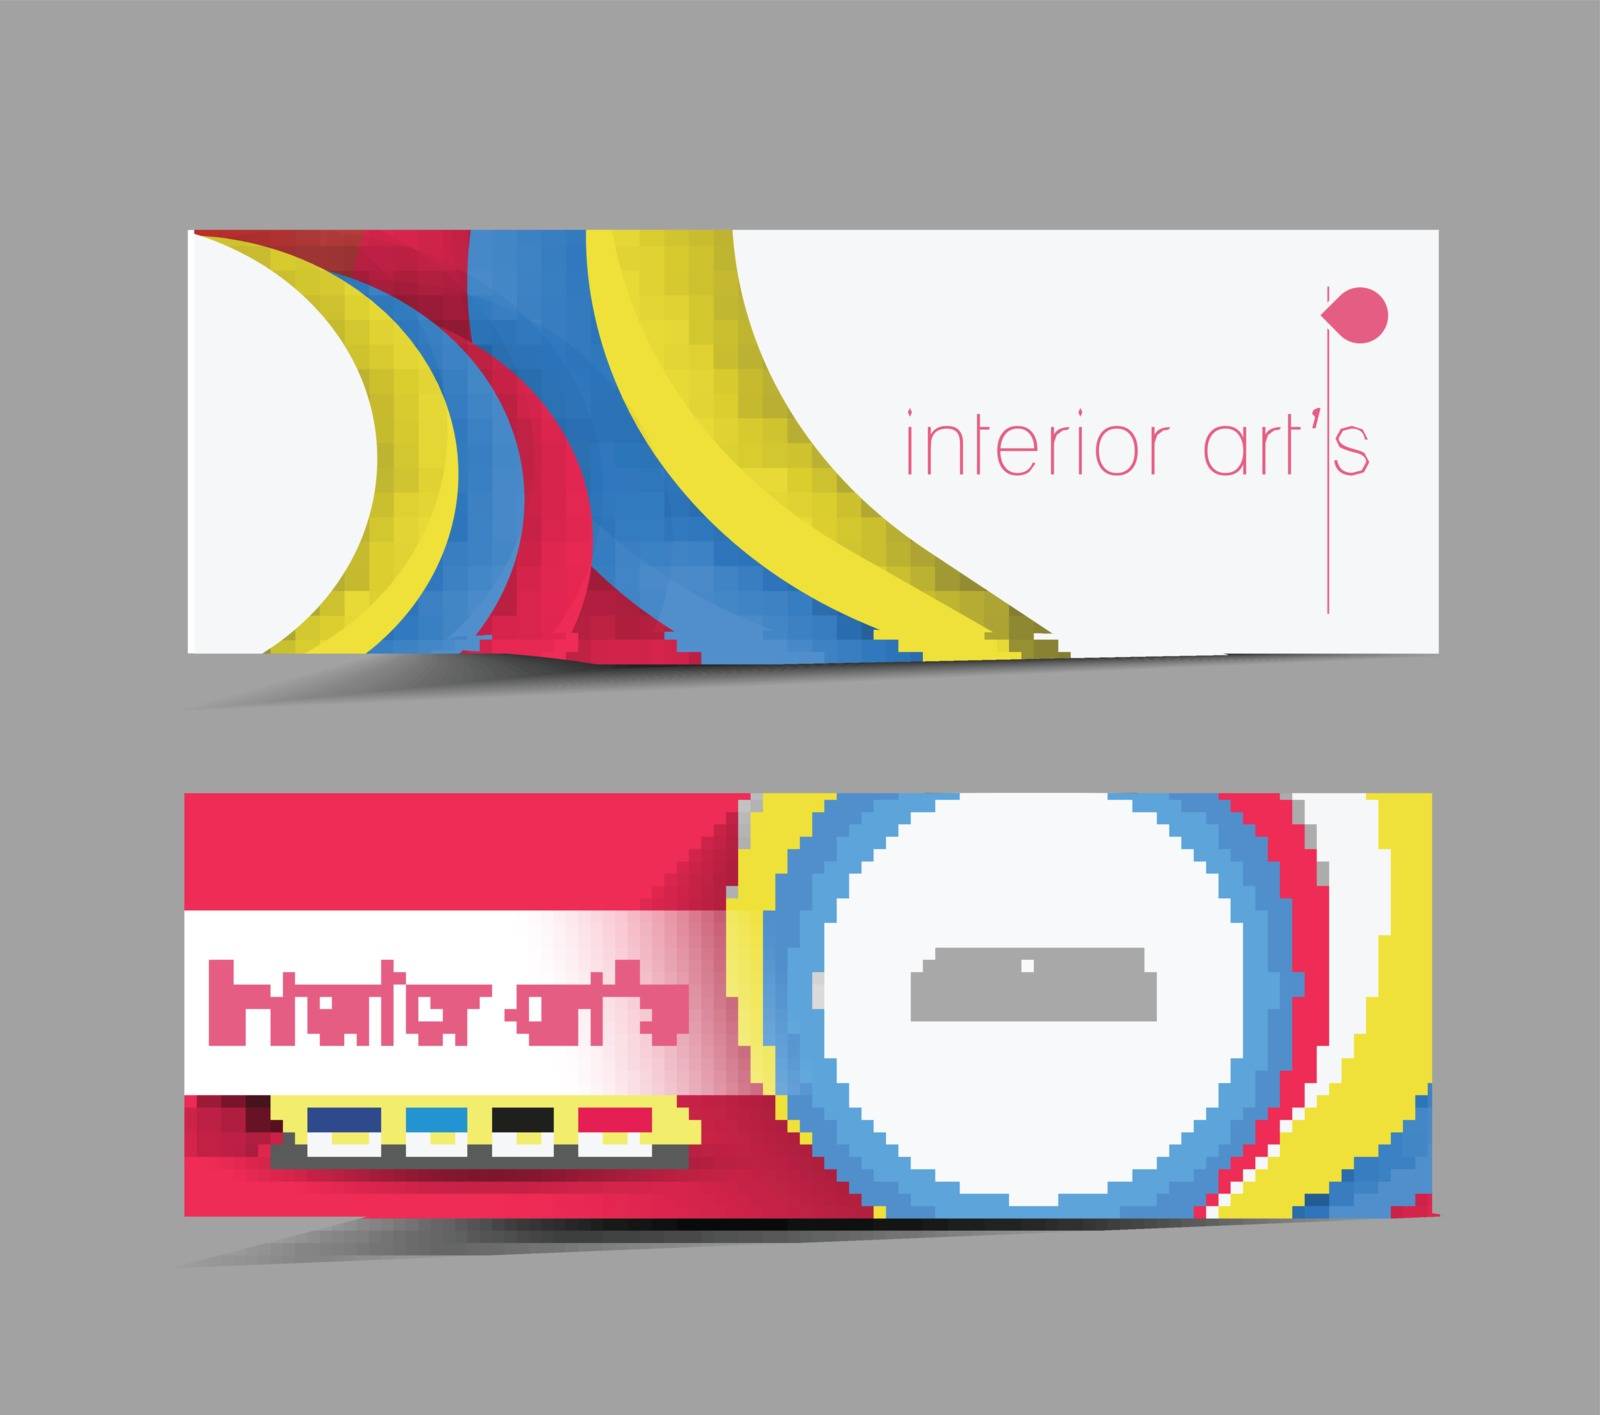 Set of abstract and colorful banners.